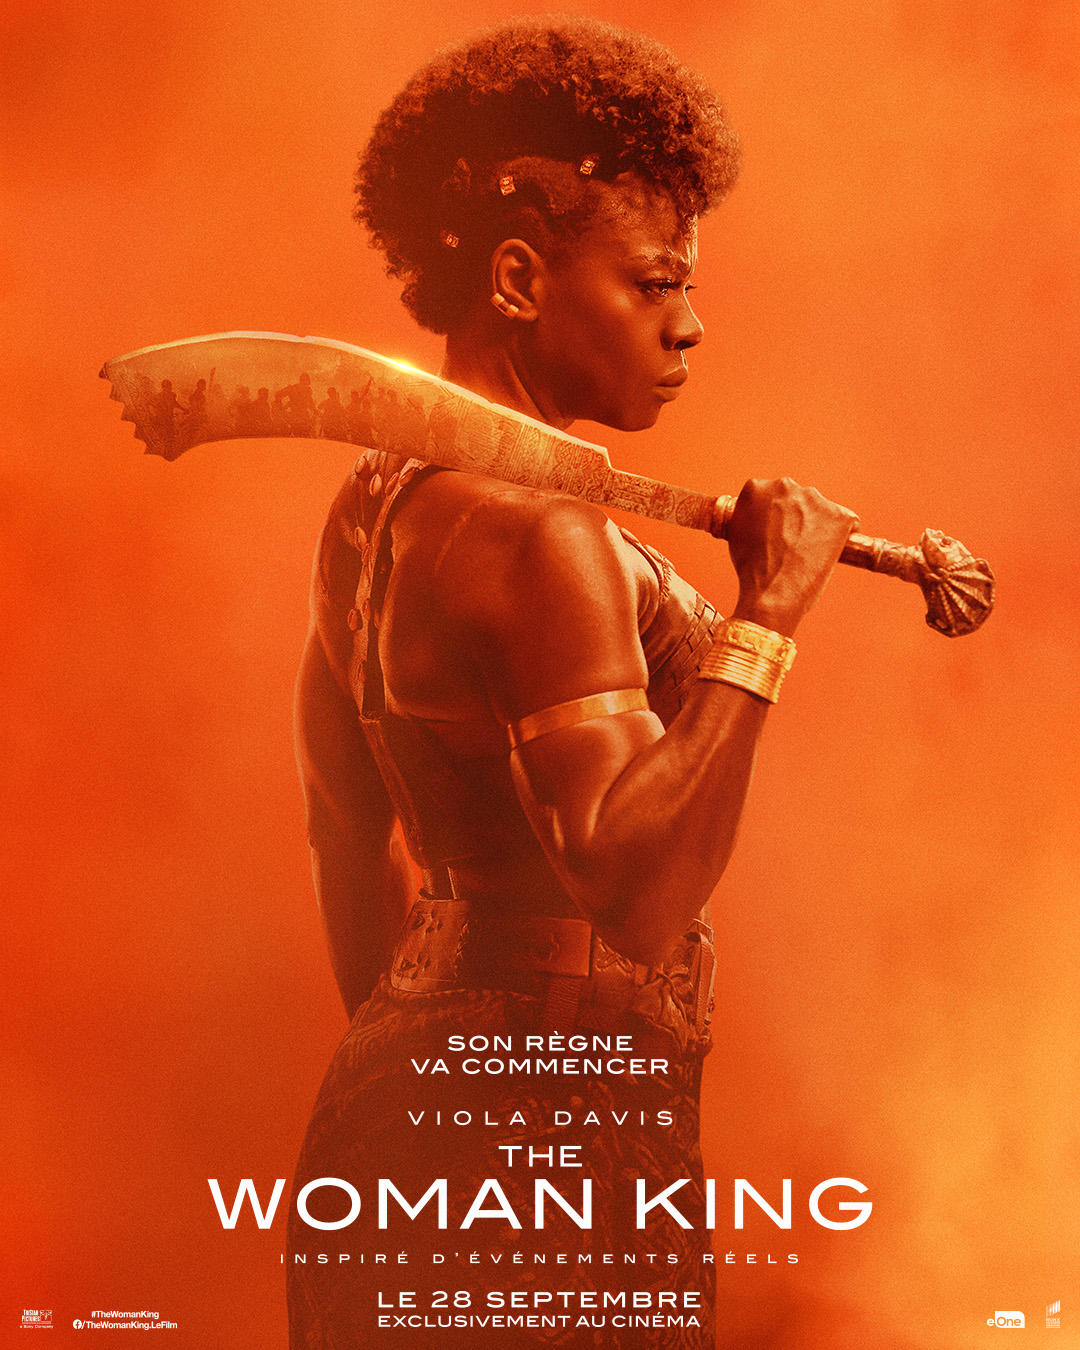 The Woman King streaming vf gratuit